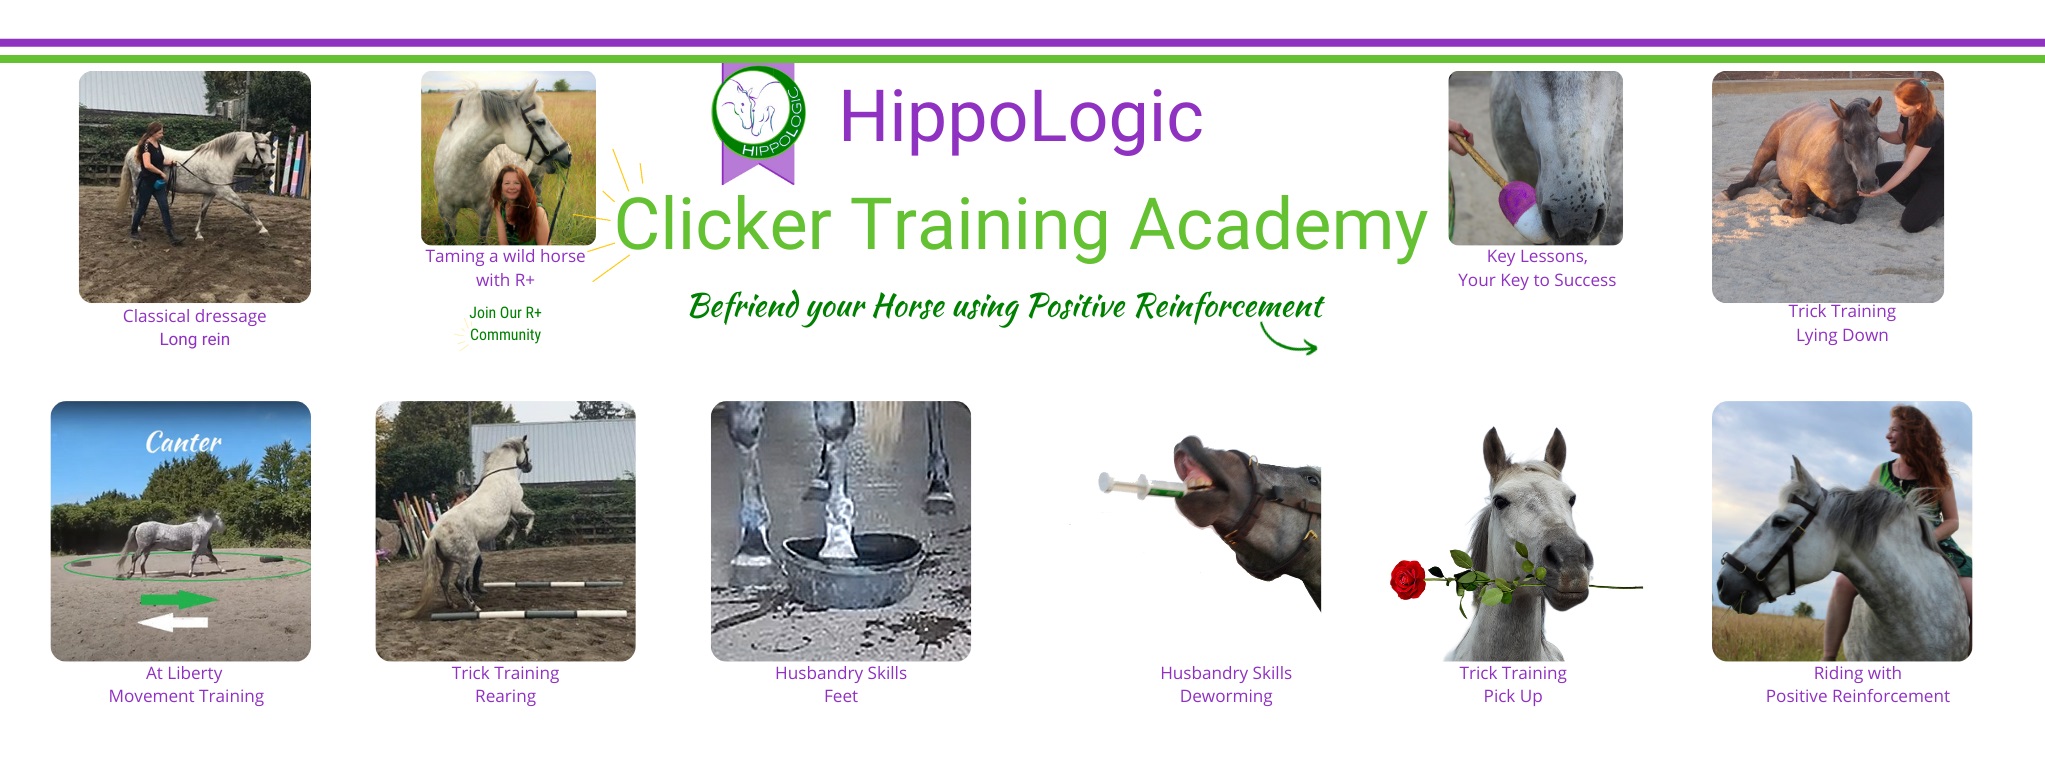 HippoLogic Clicker training academy Youtube channel banner (8)